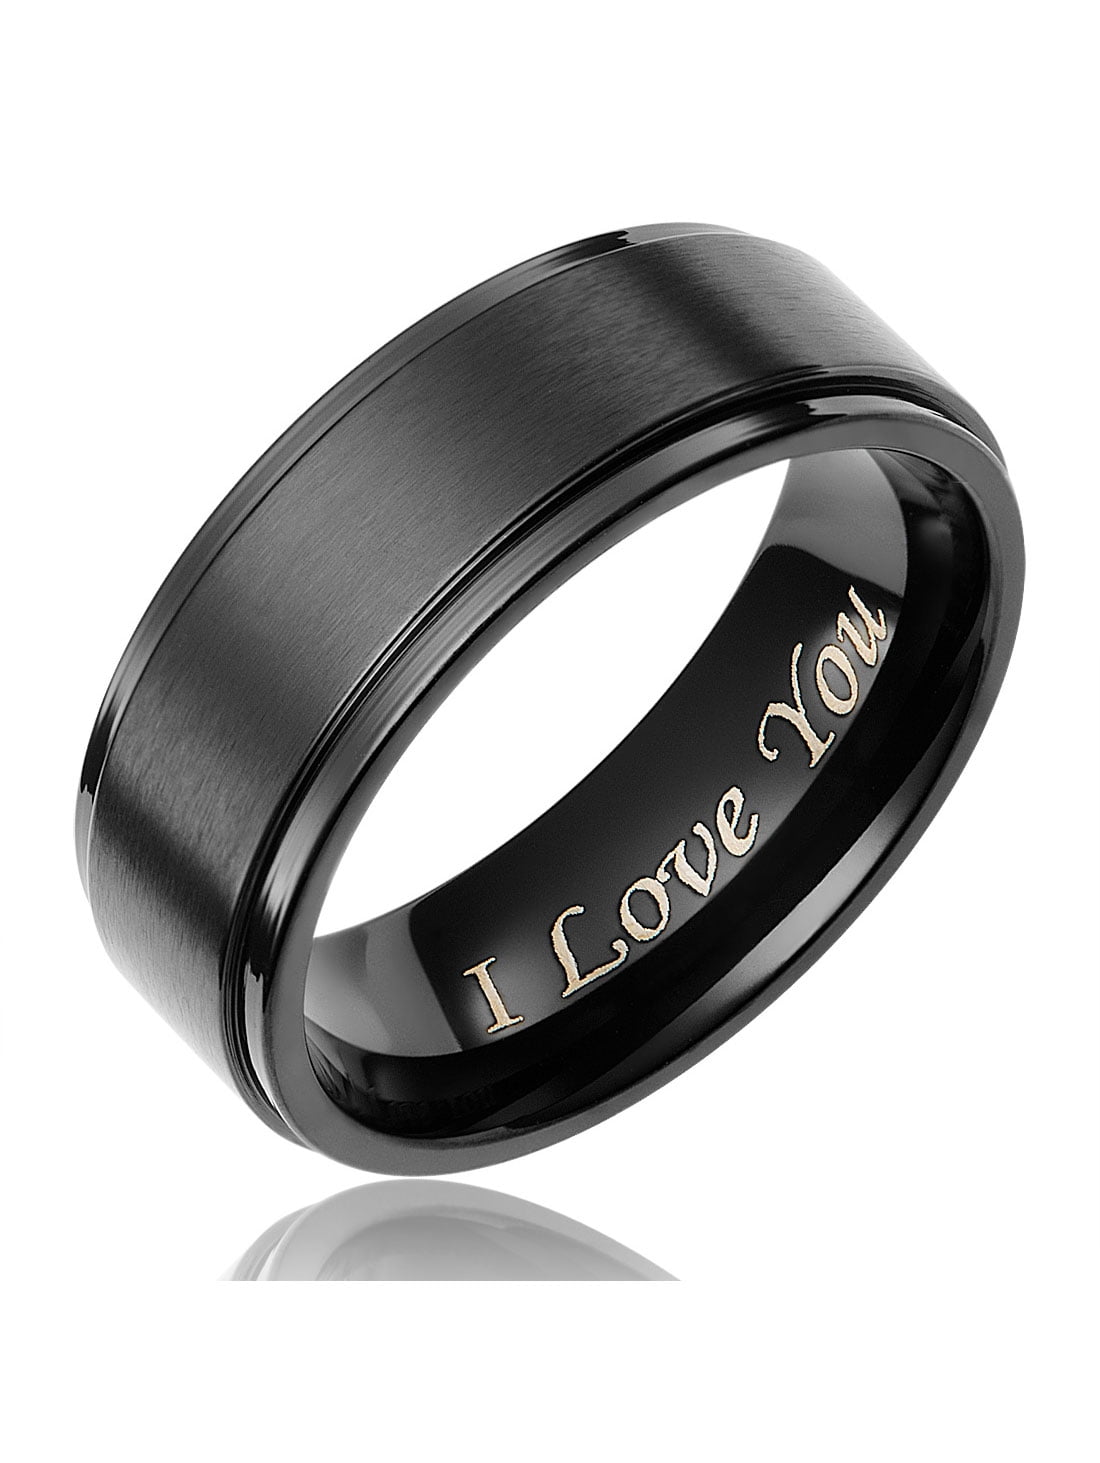 8mm Engraved Tungsten Ring Brushed Black with Silver Edge Men's Jewelry 